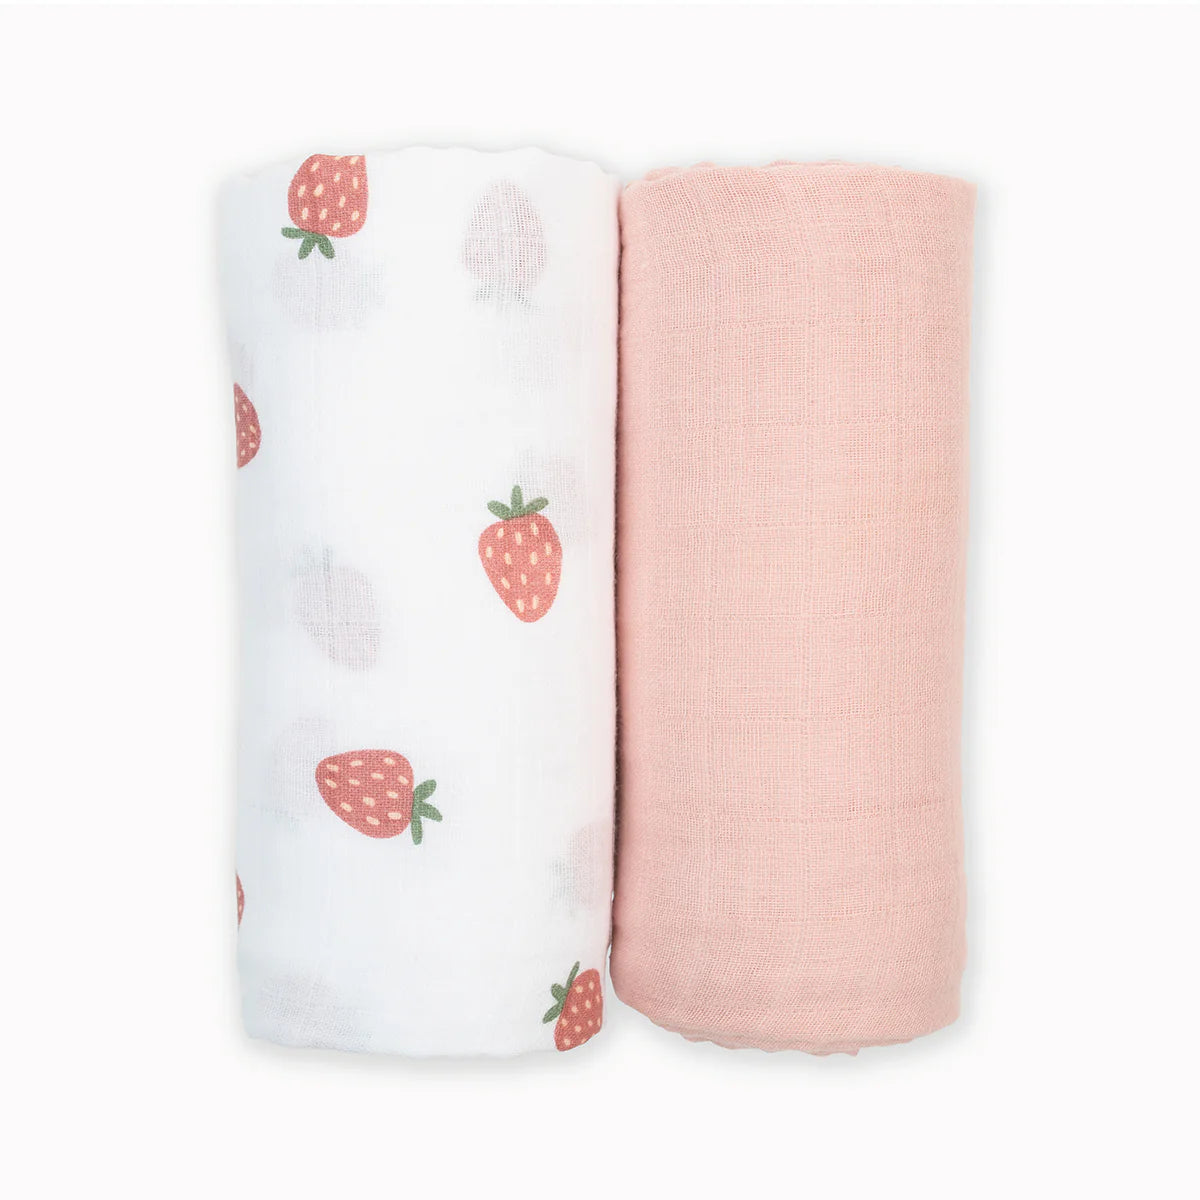 Cotton Muslin Blankets, Pack of 2 - Strawberries/Ballet Slippers